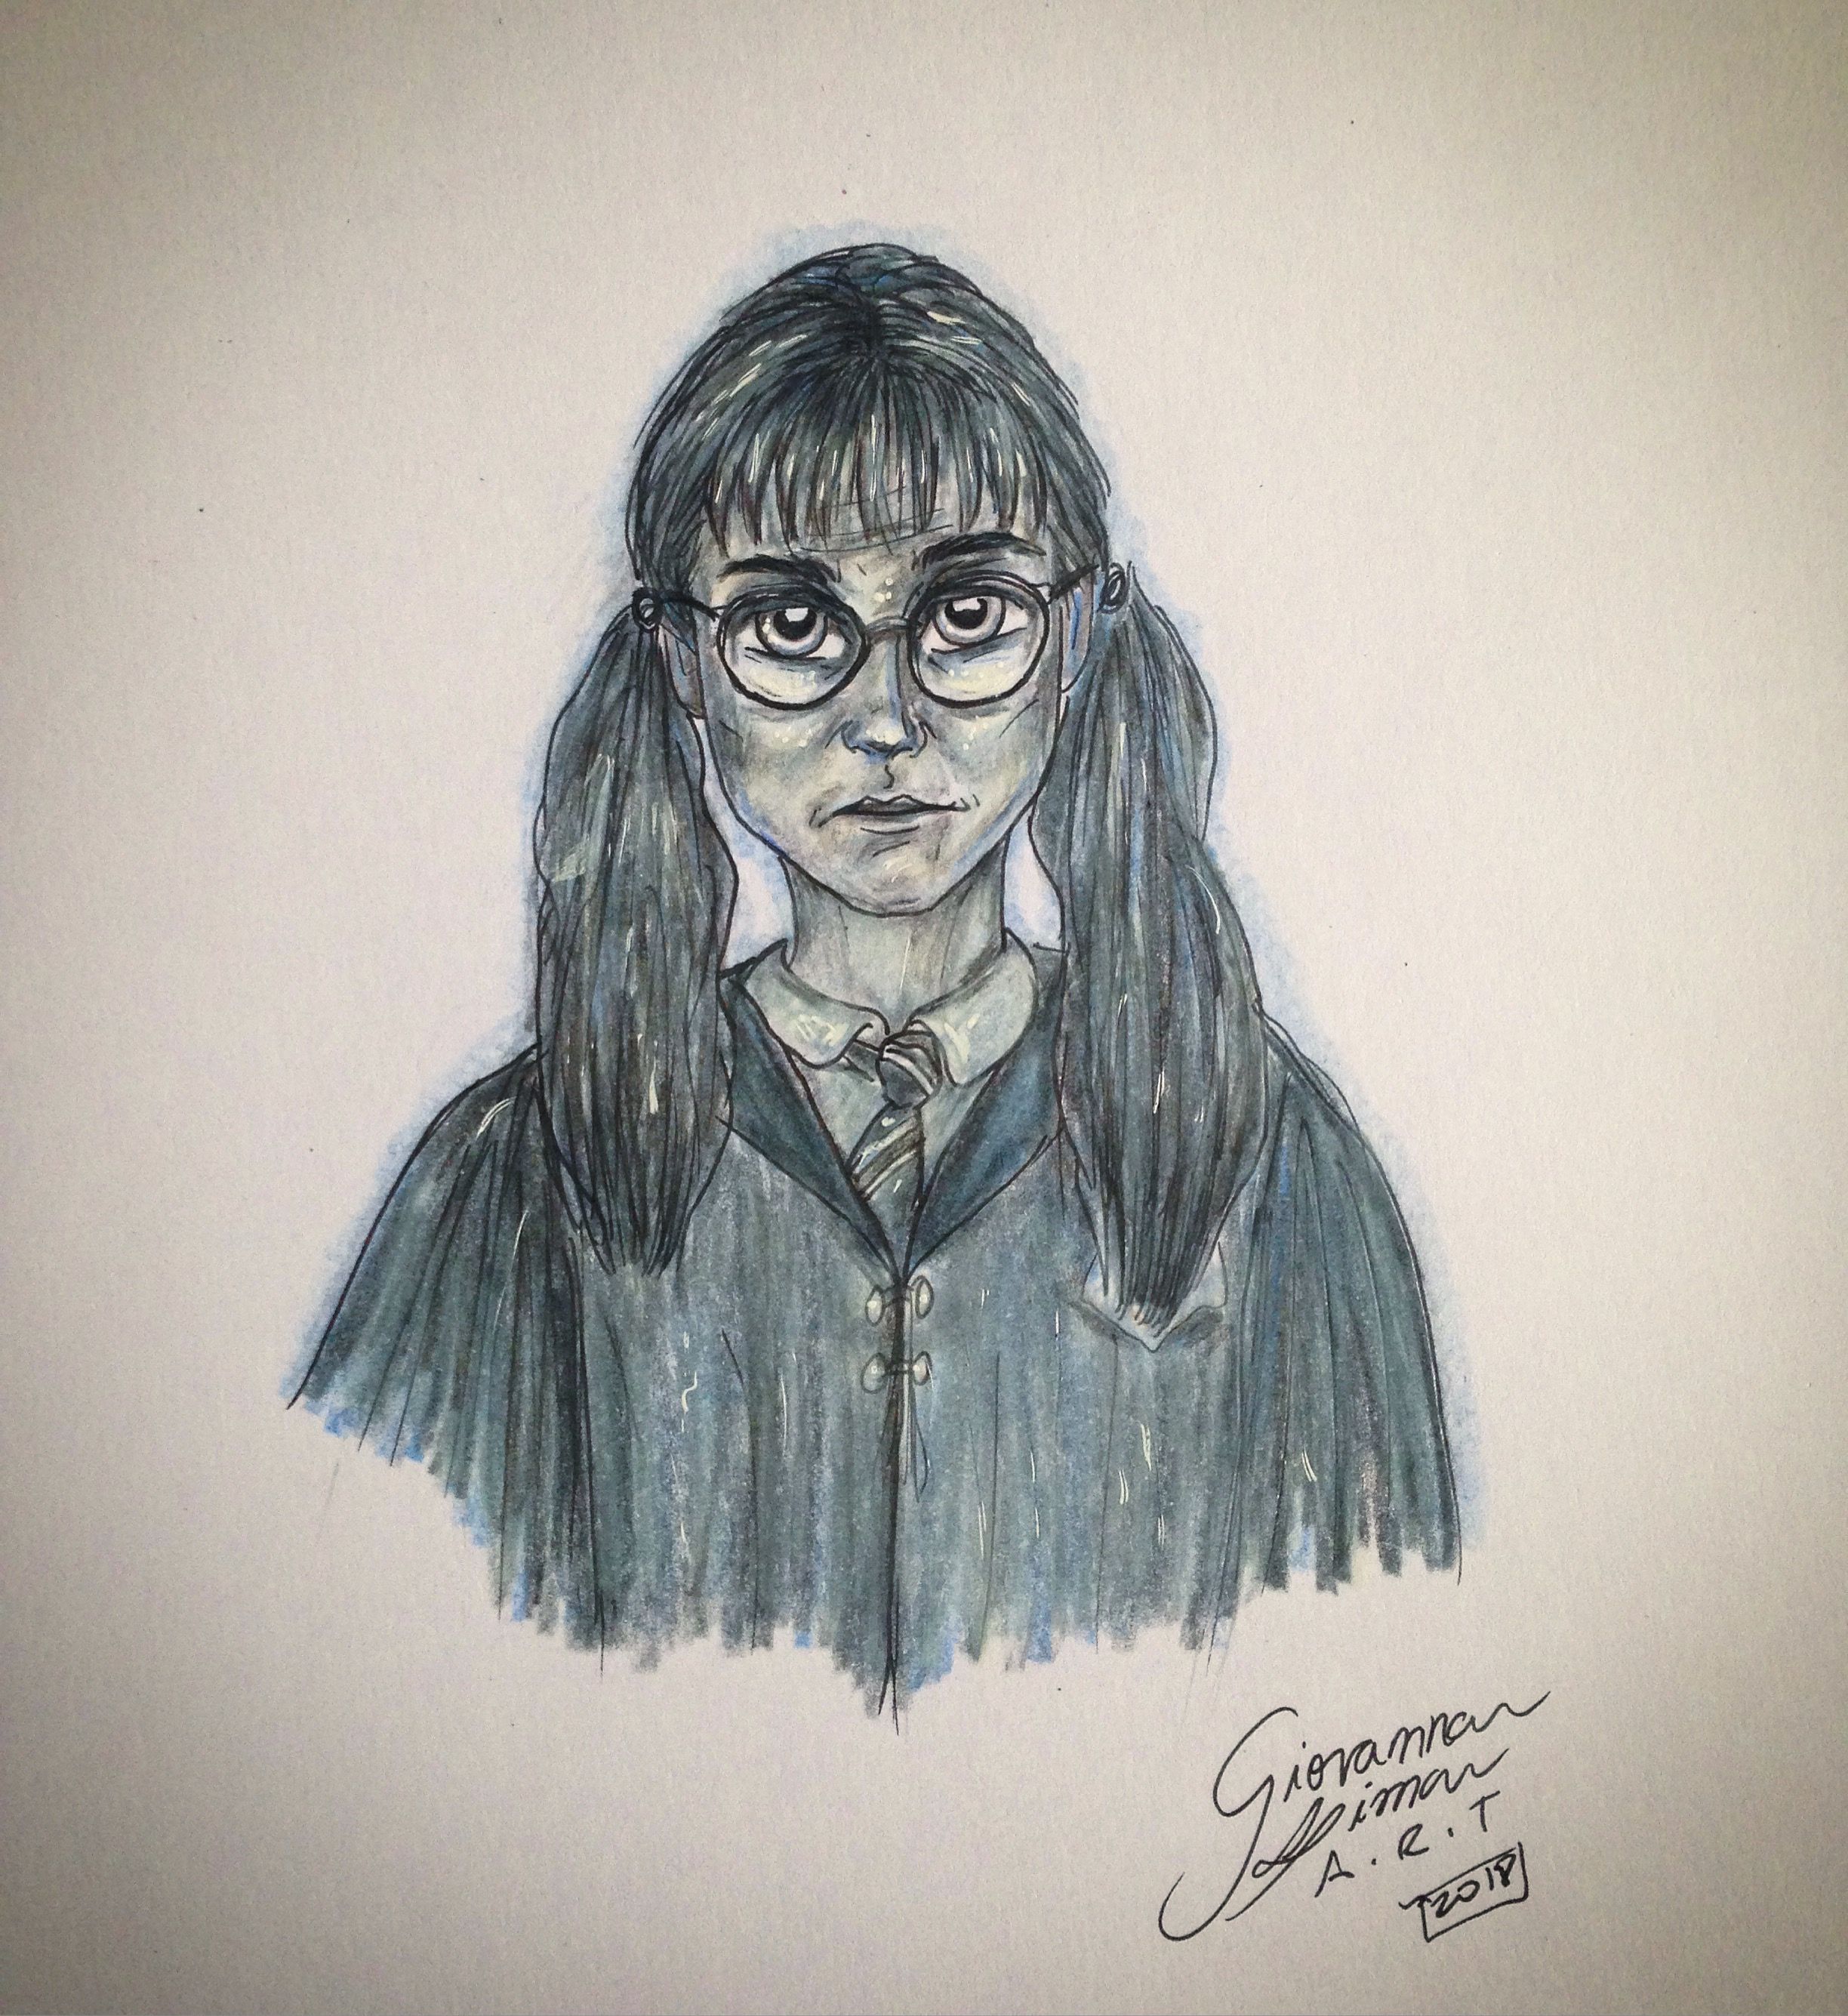 3201b3adc4675987e7e70c34163a8265 How to draw Harry Potter characters (Drawing ideas and tutorials)